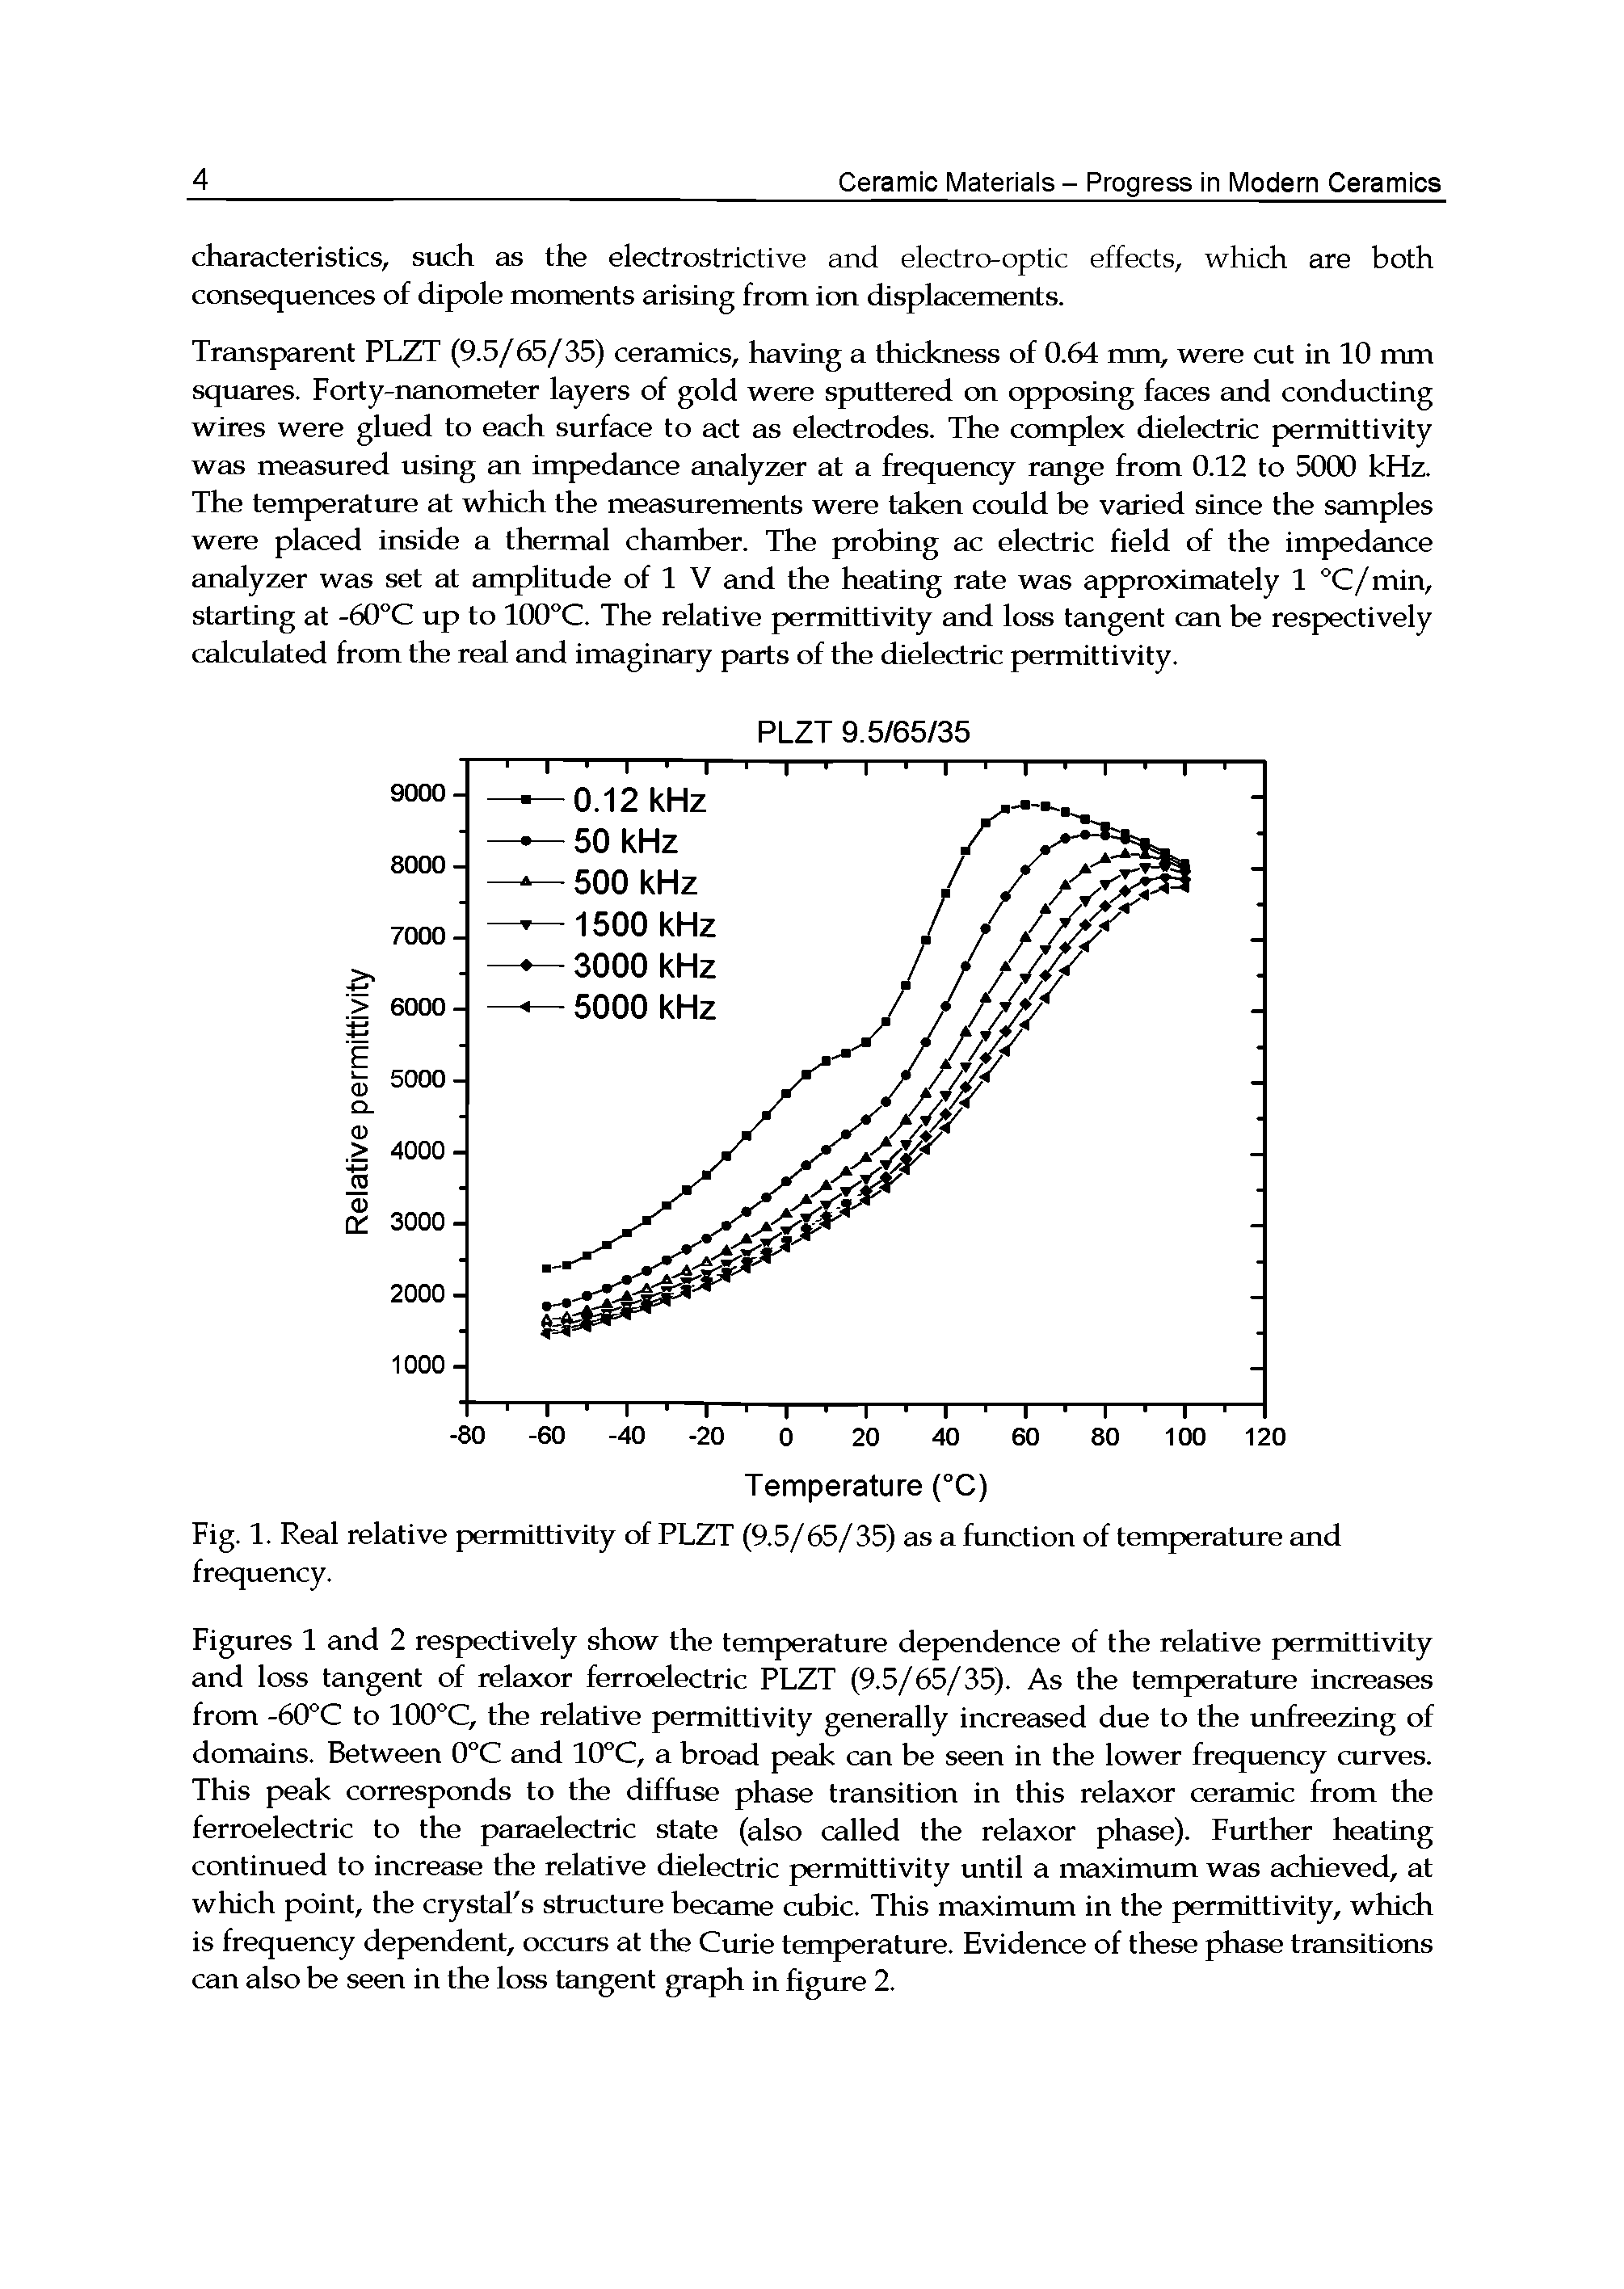 Figures 1 and 2 respectively show the temperature dependence of the relative permittivity and loss tangent of relaxor ferroelectric PLZT (9.5/65/35). As the temperature increases from -60°C to 100°C, the relative permittivity generally increased due to the unfreezing of domains. Between 0°C and 10°C, a broad peak can be seen in the lower frequency curves. This peak corresponds to the diffuse phase transition in this relaxor ceramic from the ferroelectric to the paraelectric state (also called the relaxor phase). Further heating continued to increase the relative dielectric permittivity until a maximum was achieved, at which point, the crystal s structure became cubic. This maximum in the permittivity, which is frequency dependent, occurs at the Curie temperature. Evidence of these phase transitions can also be seen in the loss tangent graph in figure 2.